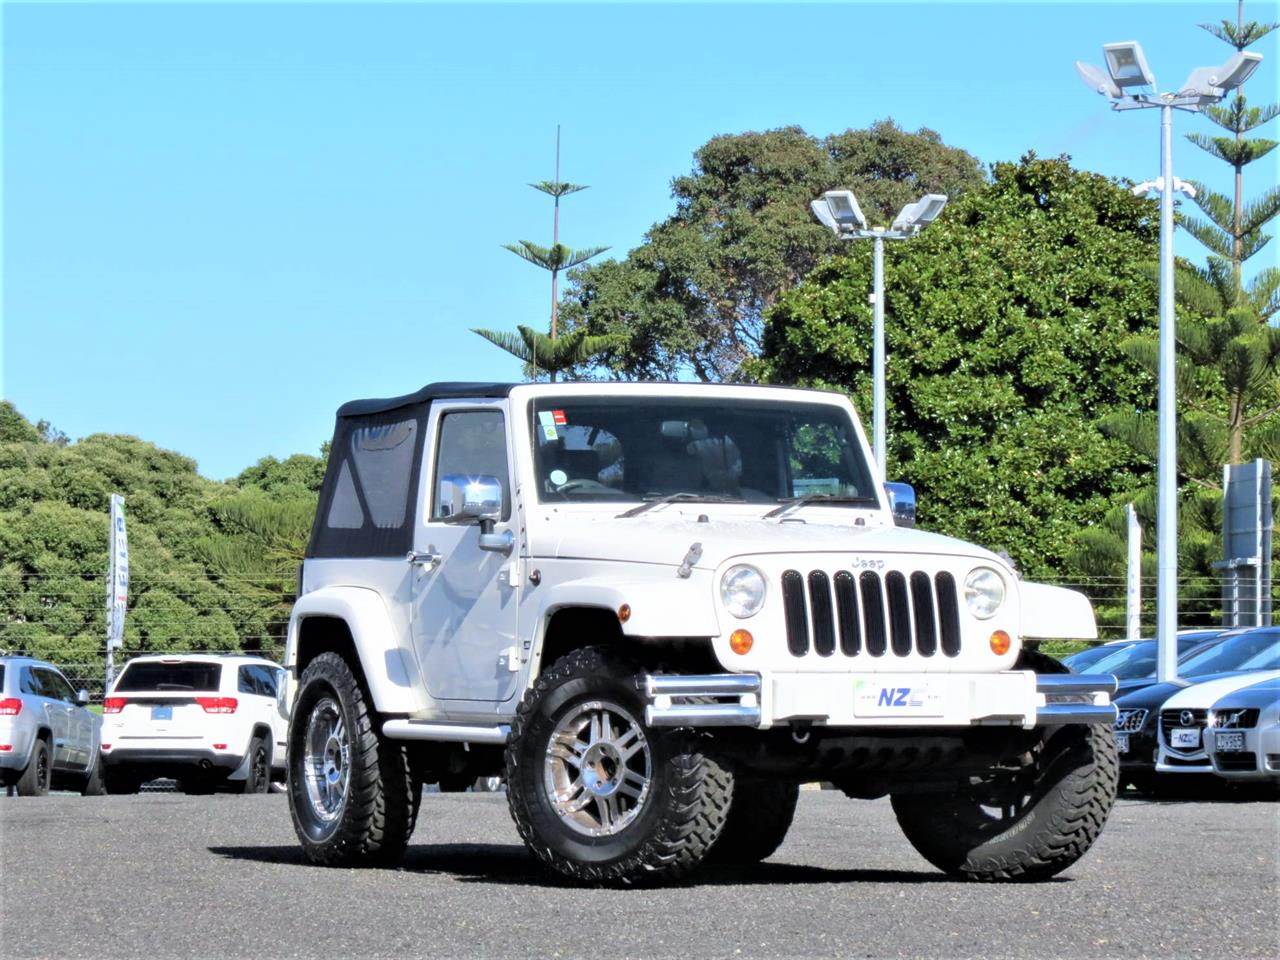 NZC 2009 Jeep WRANGLER just arrived to Auckland